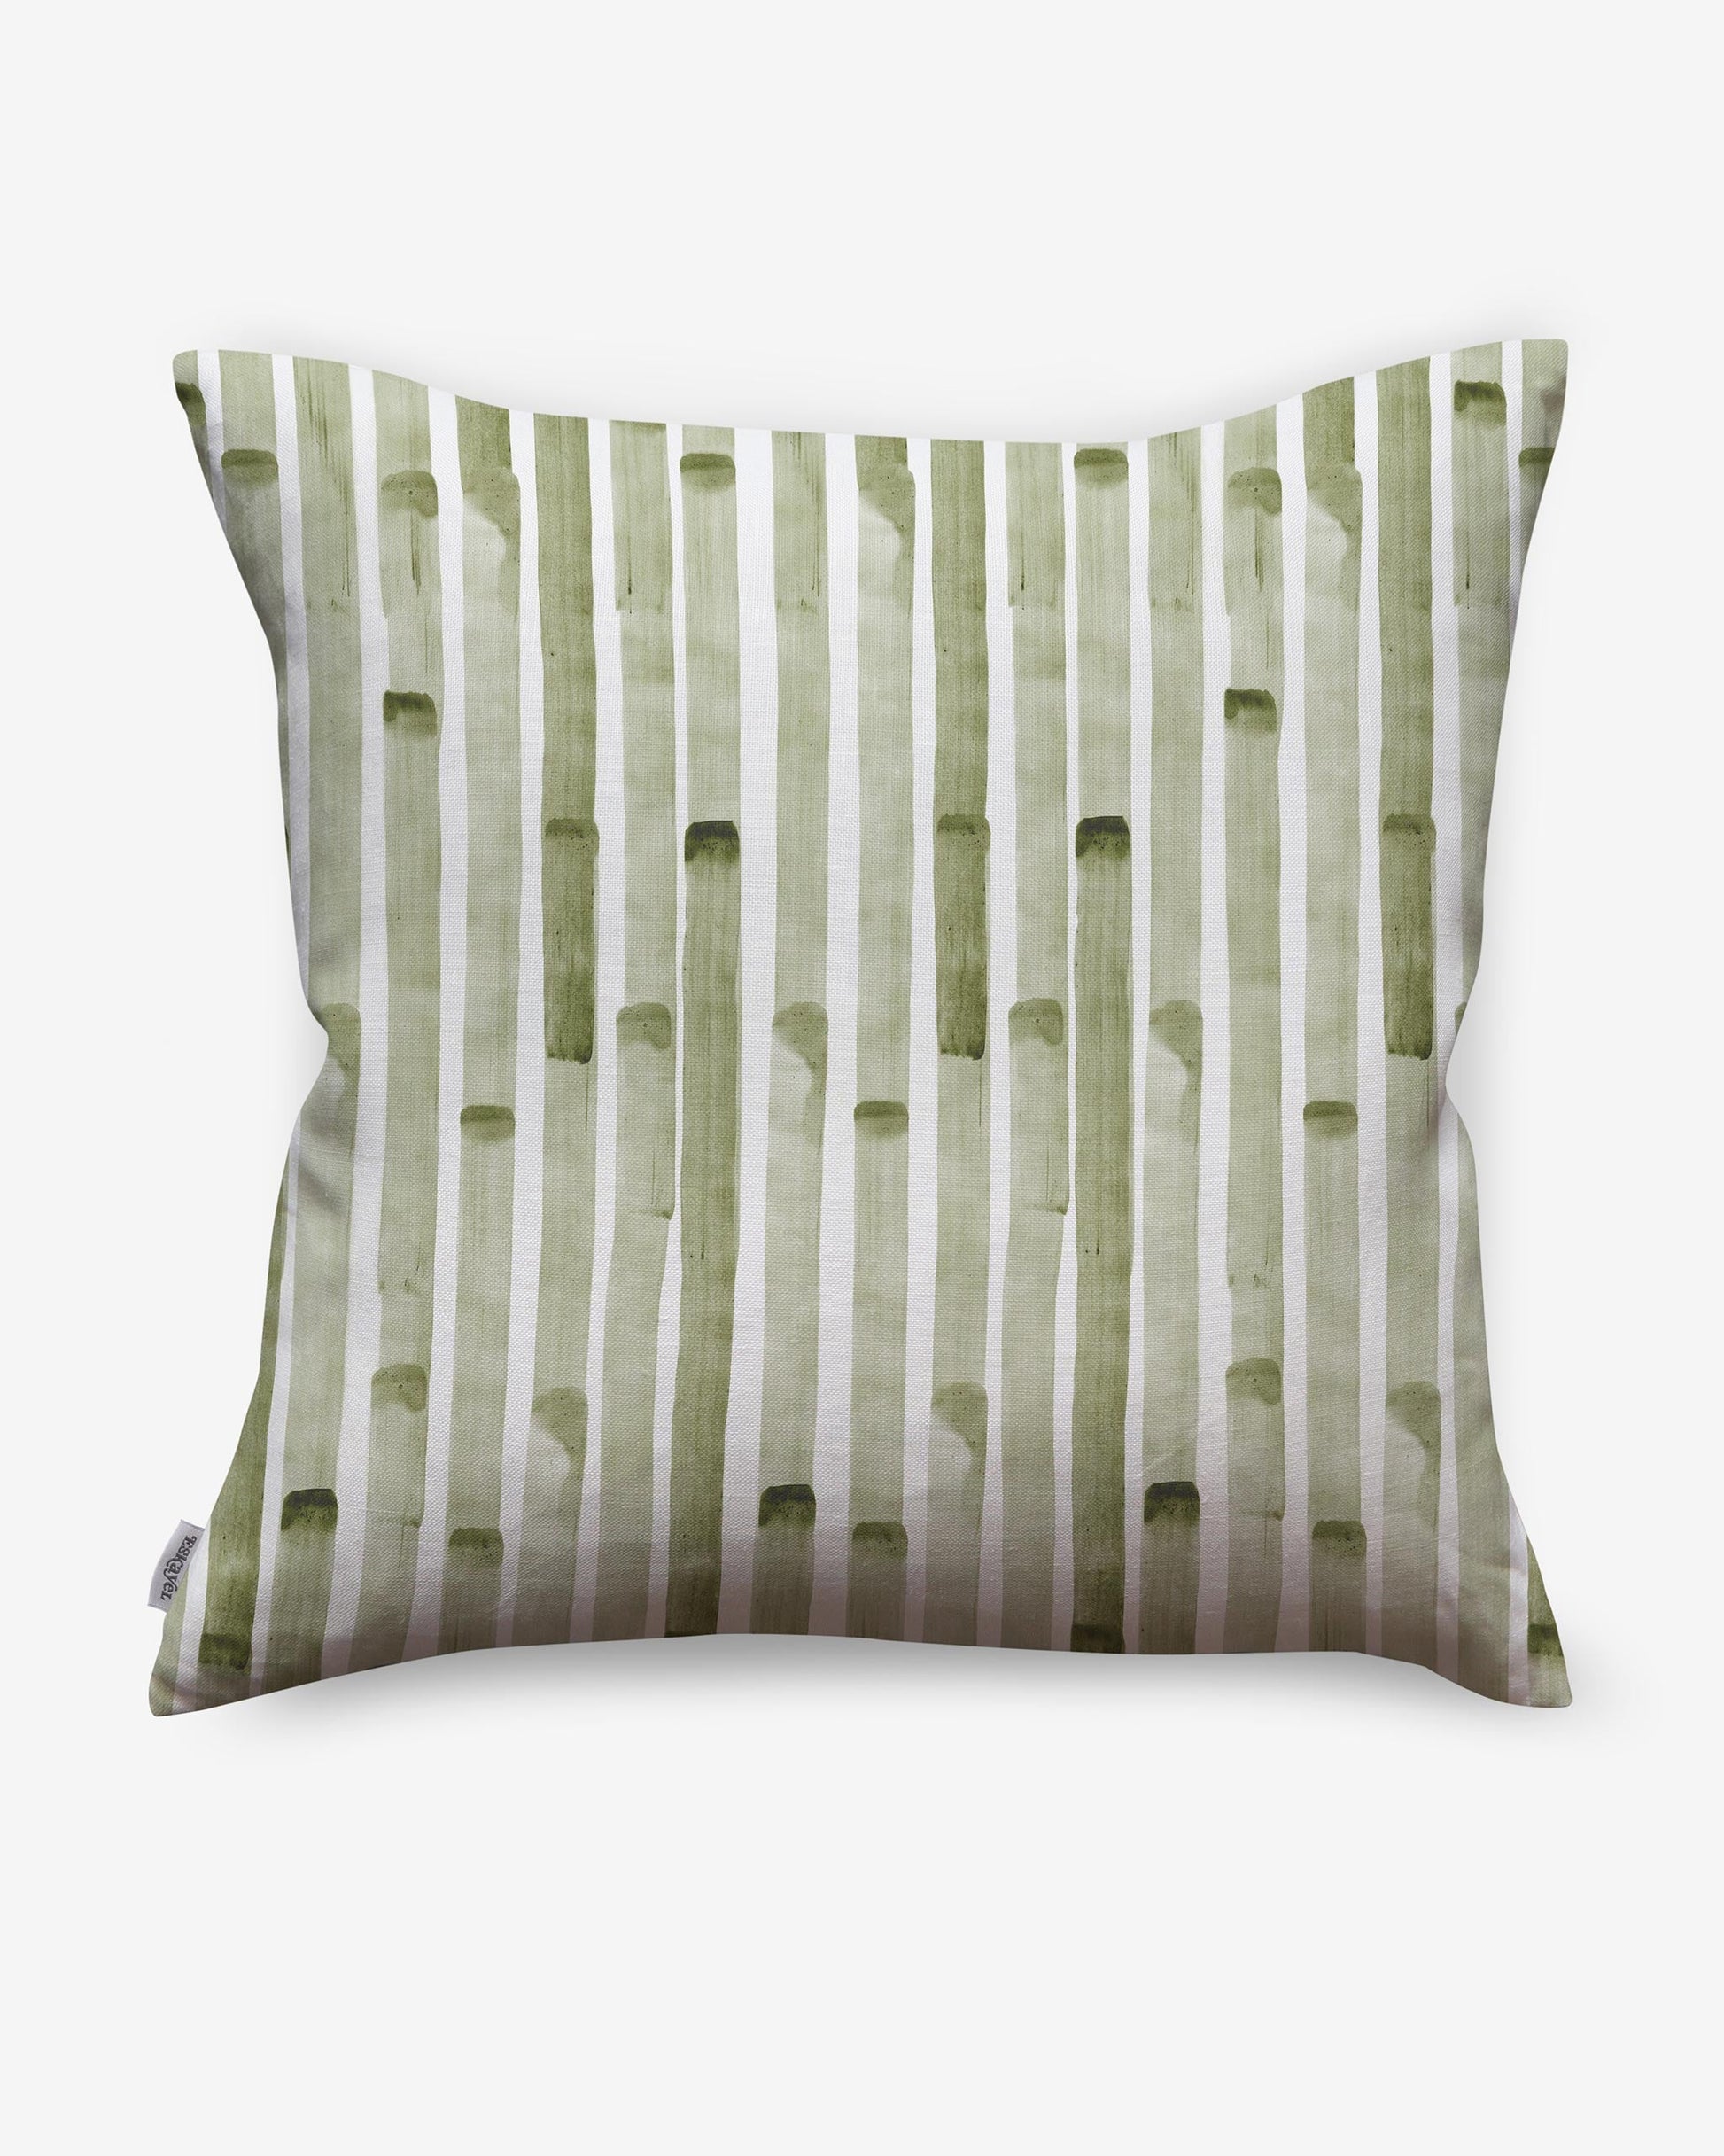 A Bamboo Stripe Outdoor Pillow with green and white stripes on it